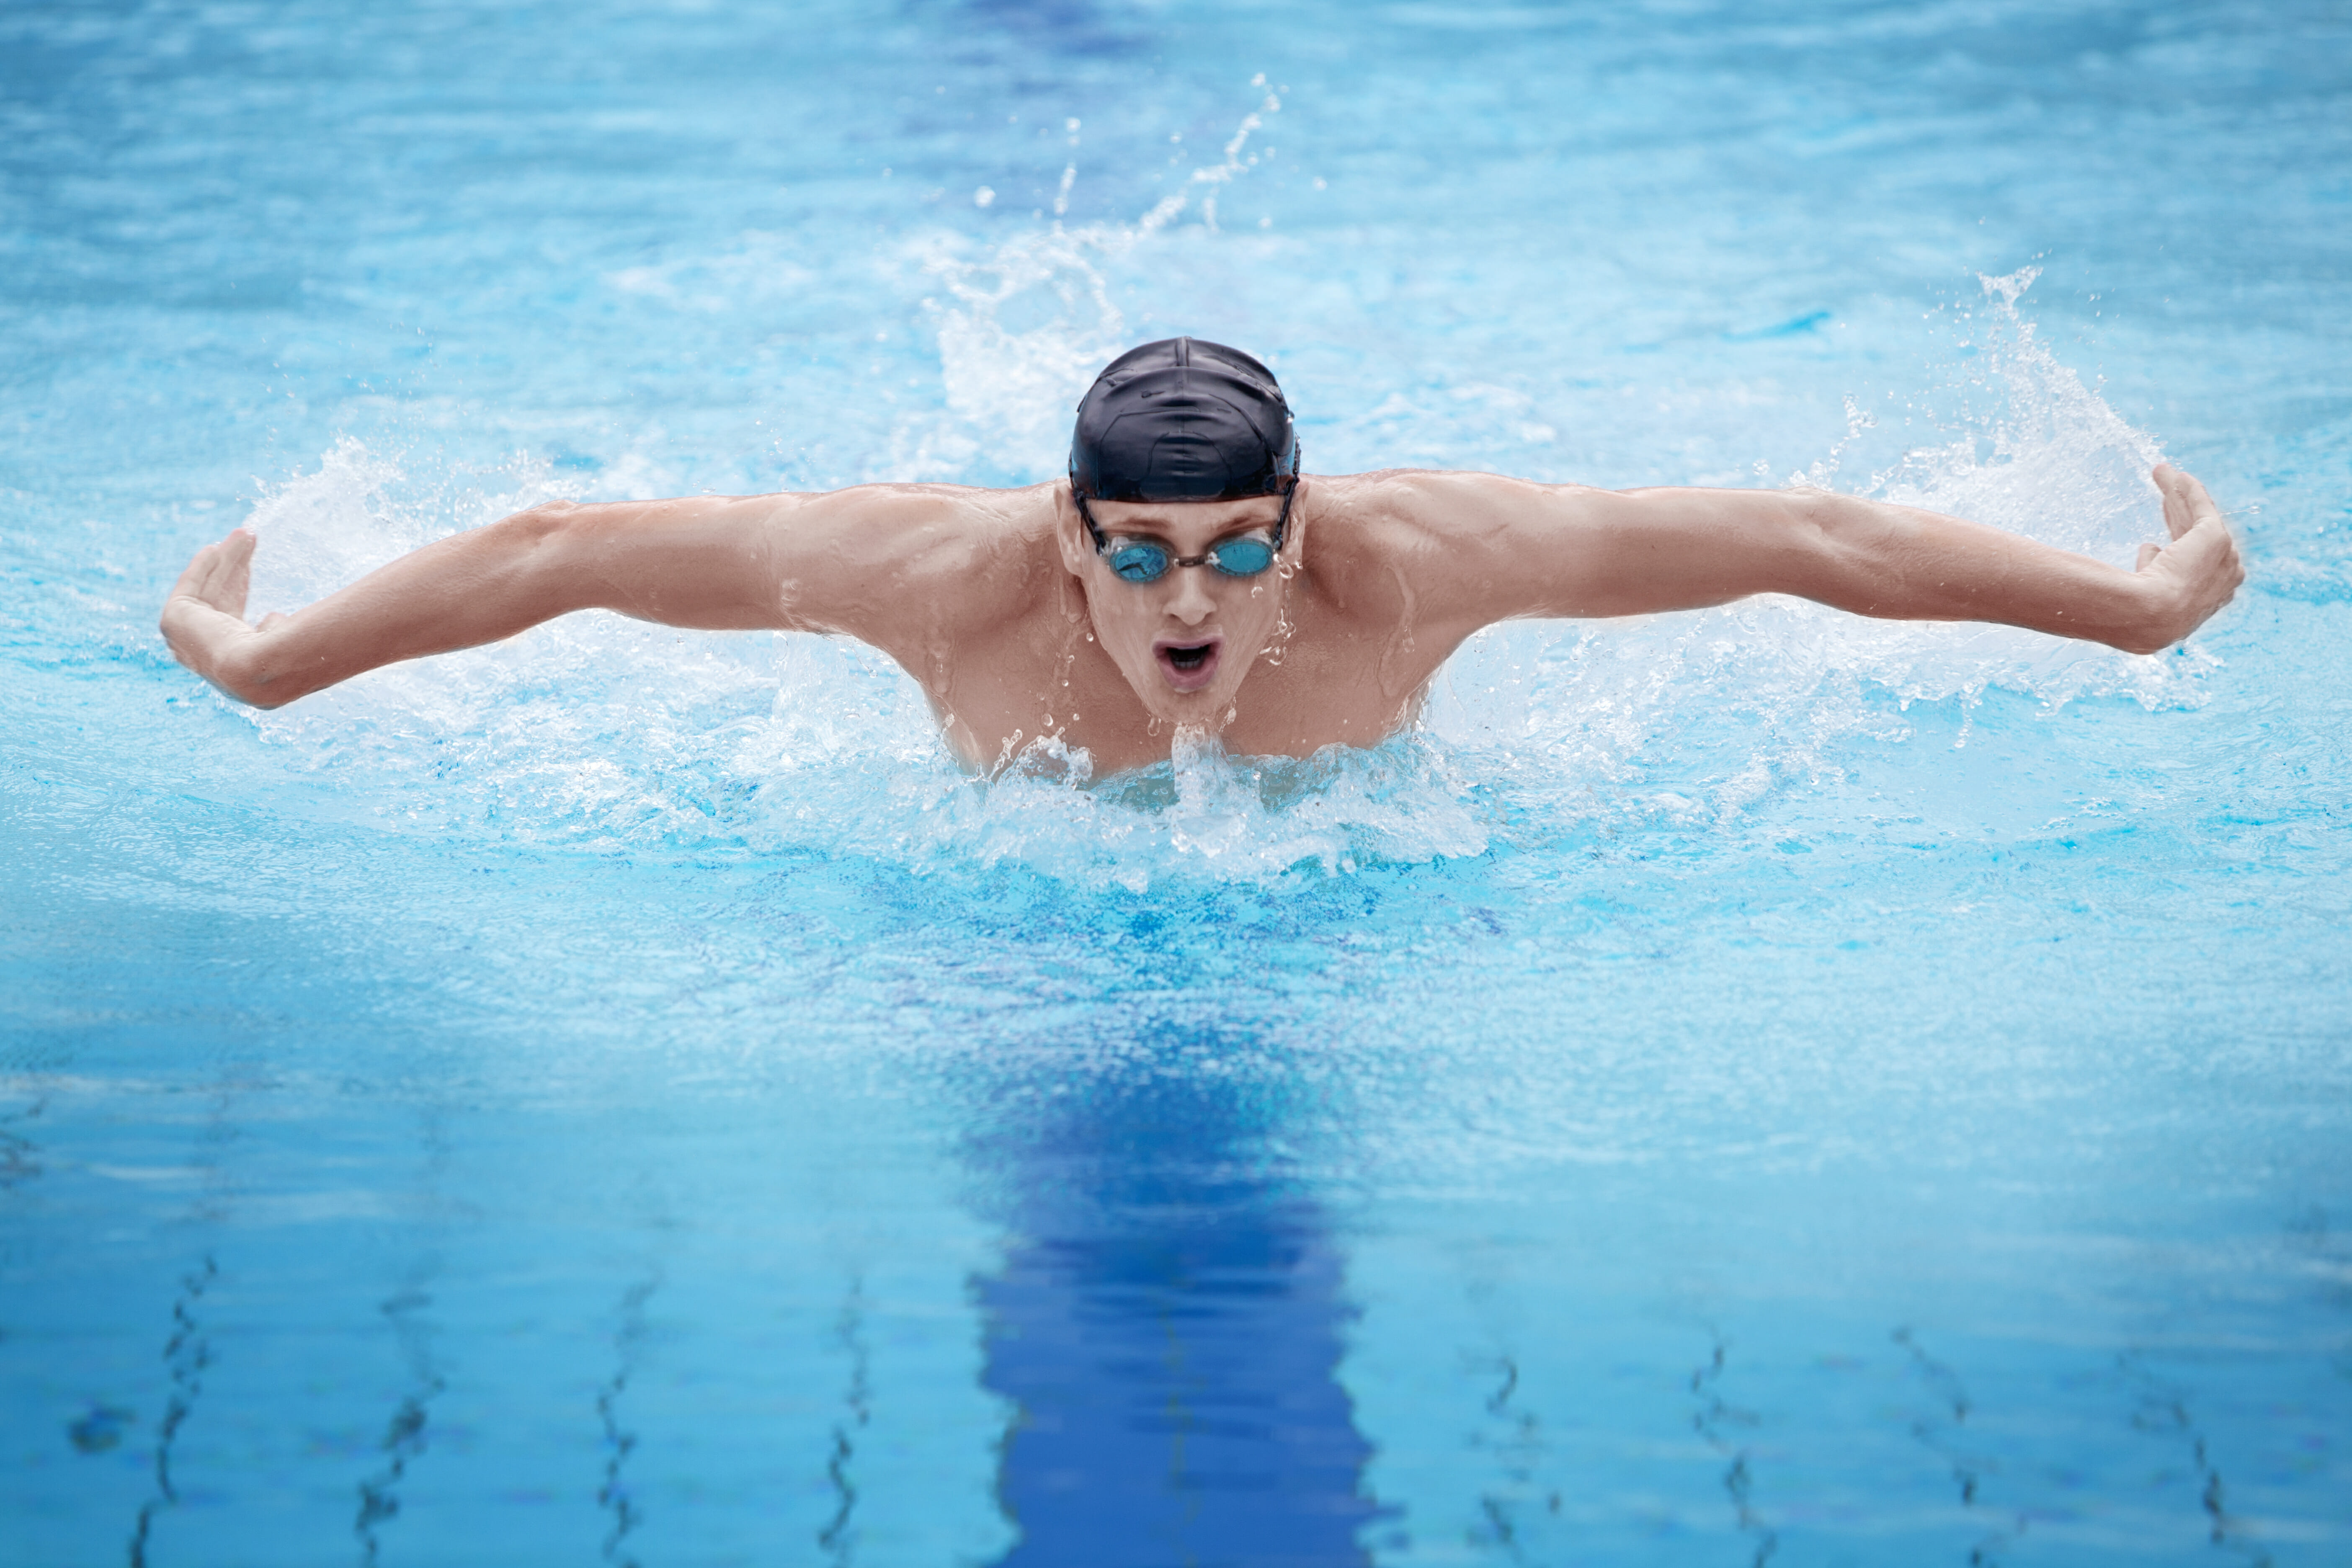 A male swimmer in goggles and a swim cap performing the butterfly stroke in a pool, creating splashes around him.